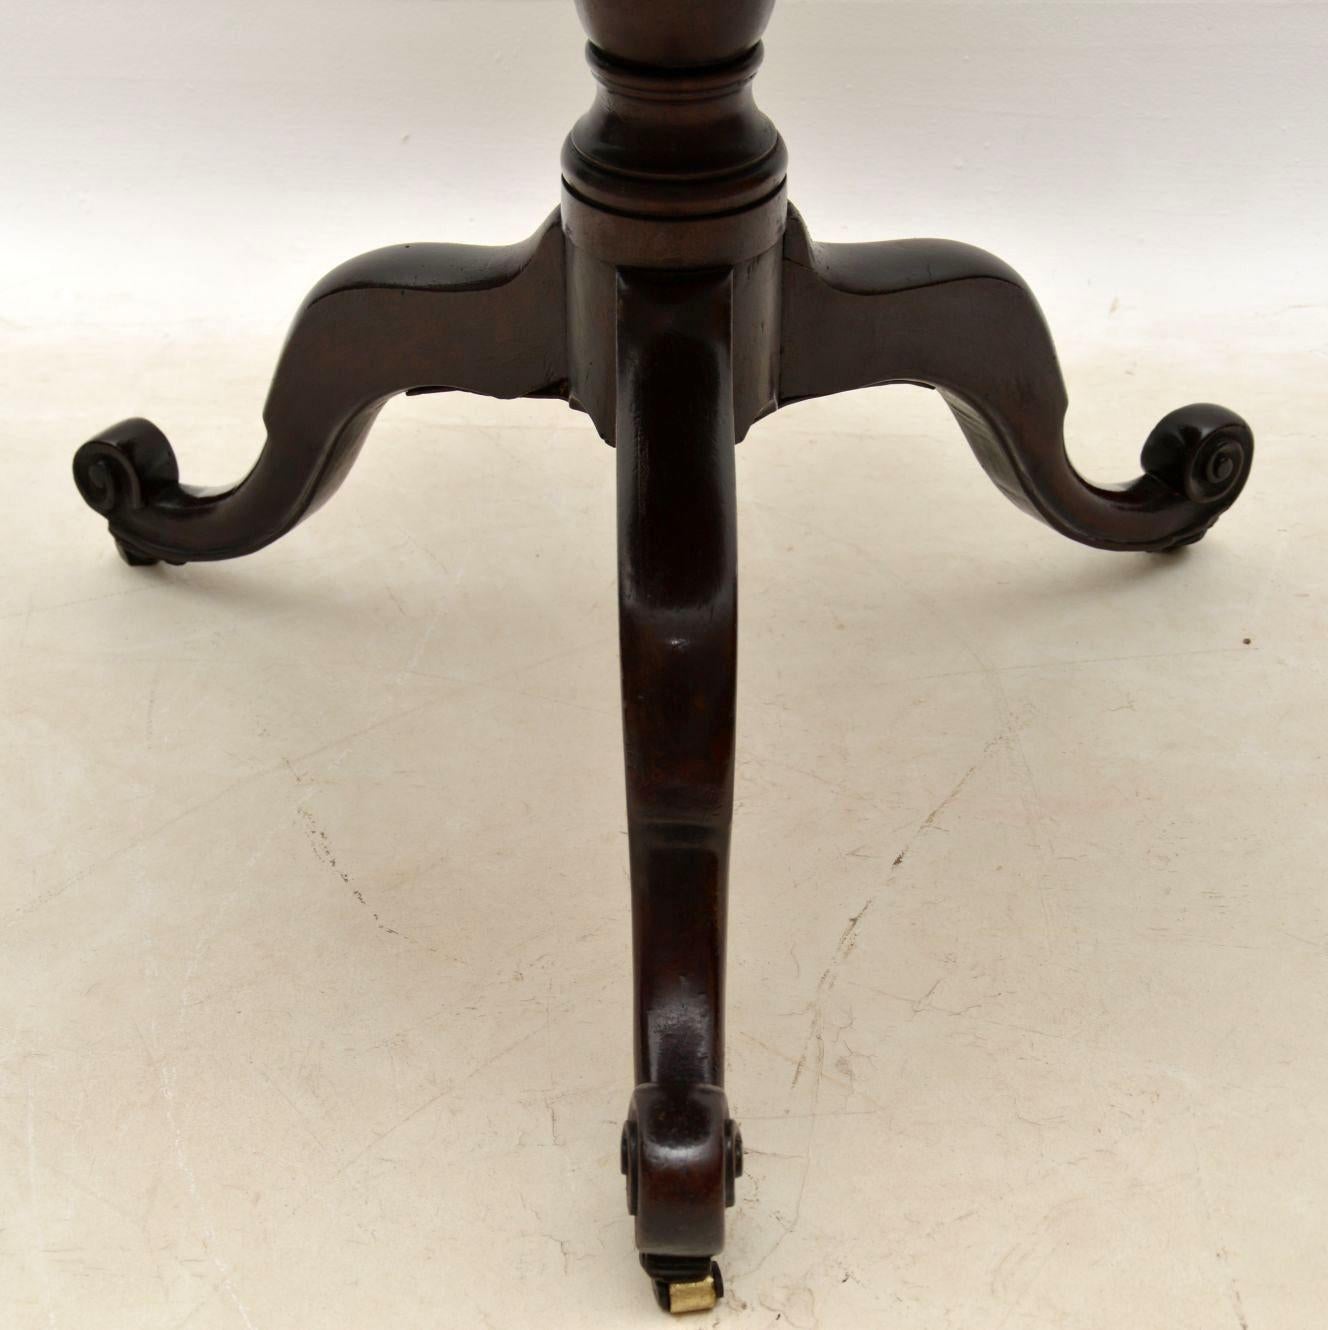 This is a fine quality antique period solid mahogany George III tripod based table in very good condition and dating to around the 1790 period or a bit earlier. It’s actually quite a useful size and could be used as a small dining table. The tripod